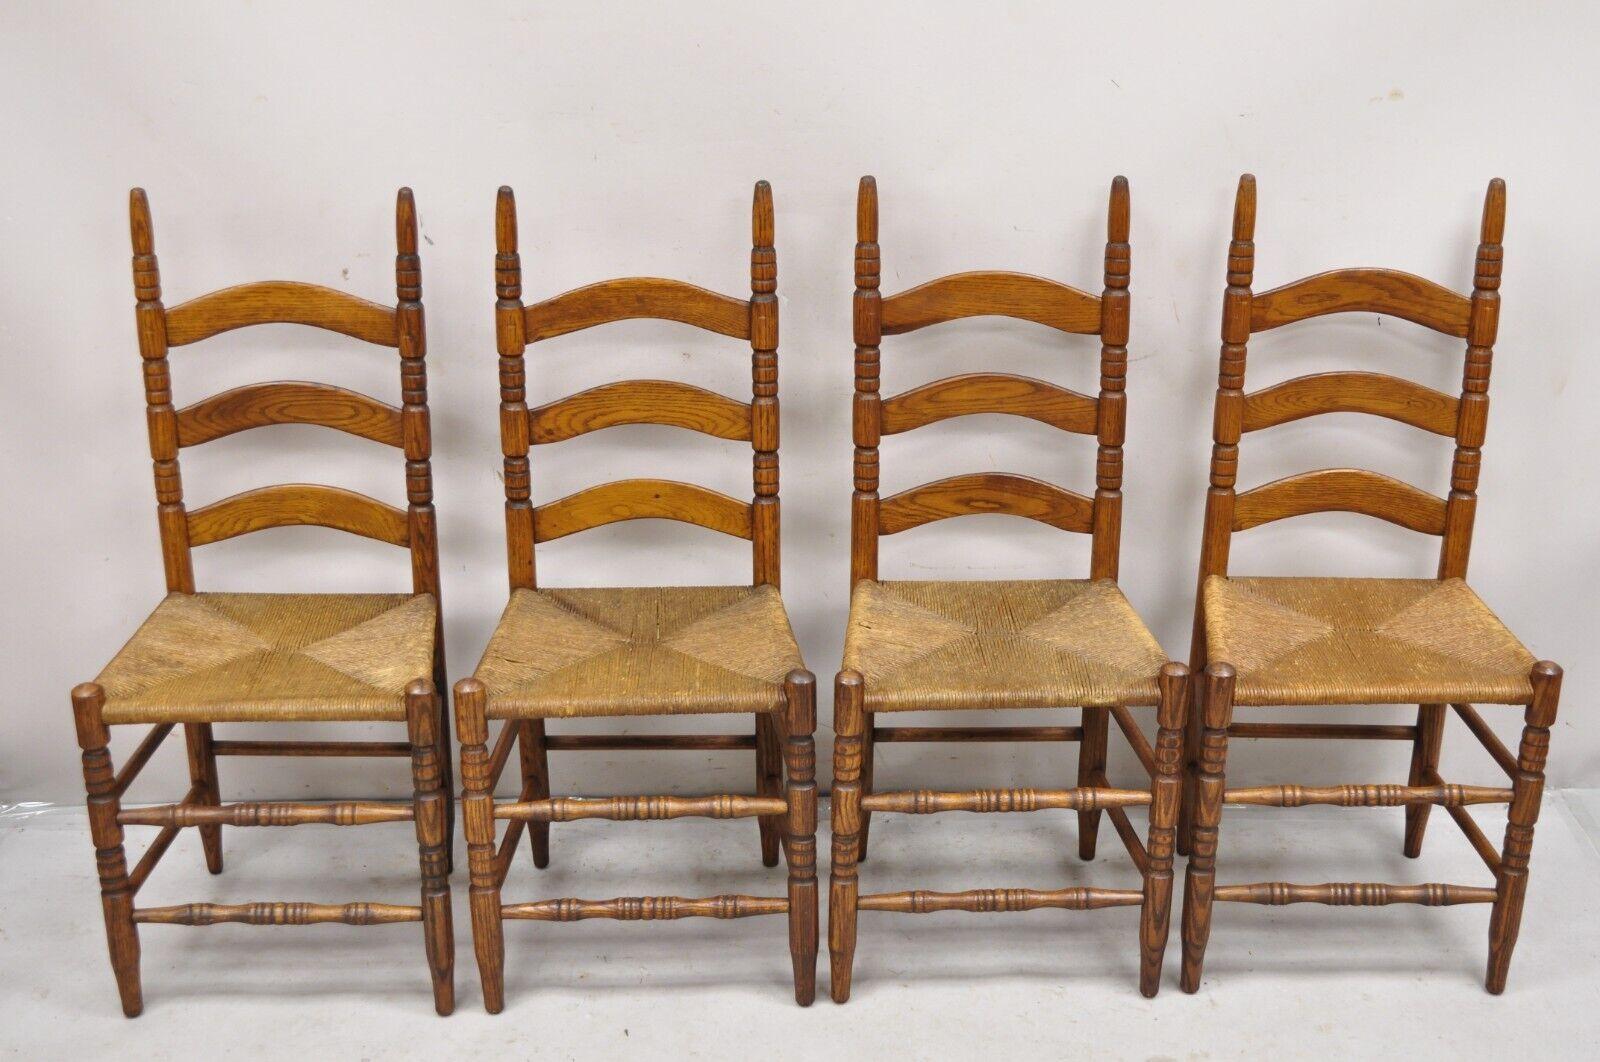 Antique Ladderback Primitive Rustic Oak Wood Rush Seat Dining Chairs - Set of 4 For Sale 6